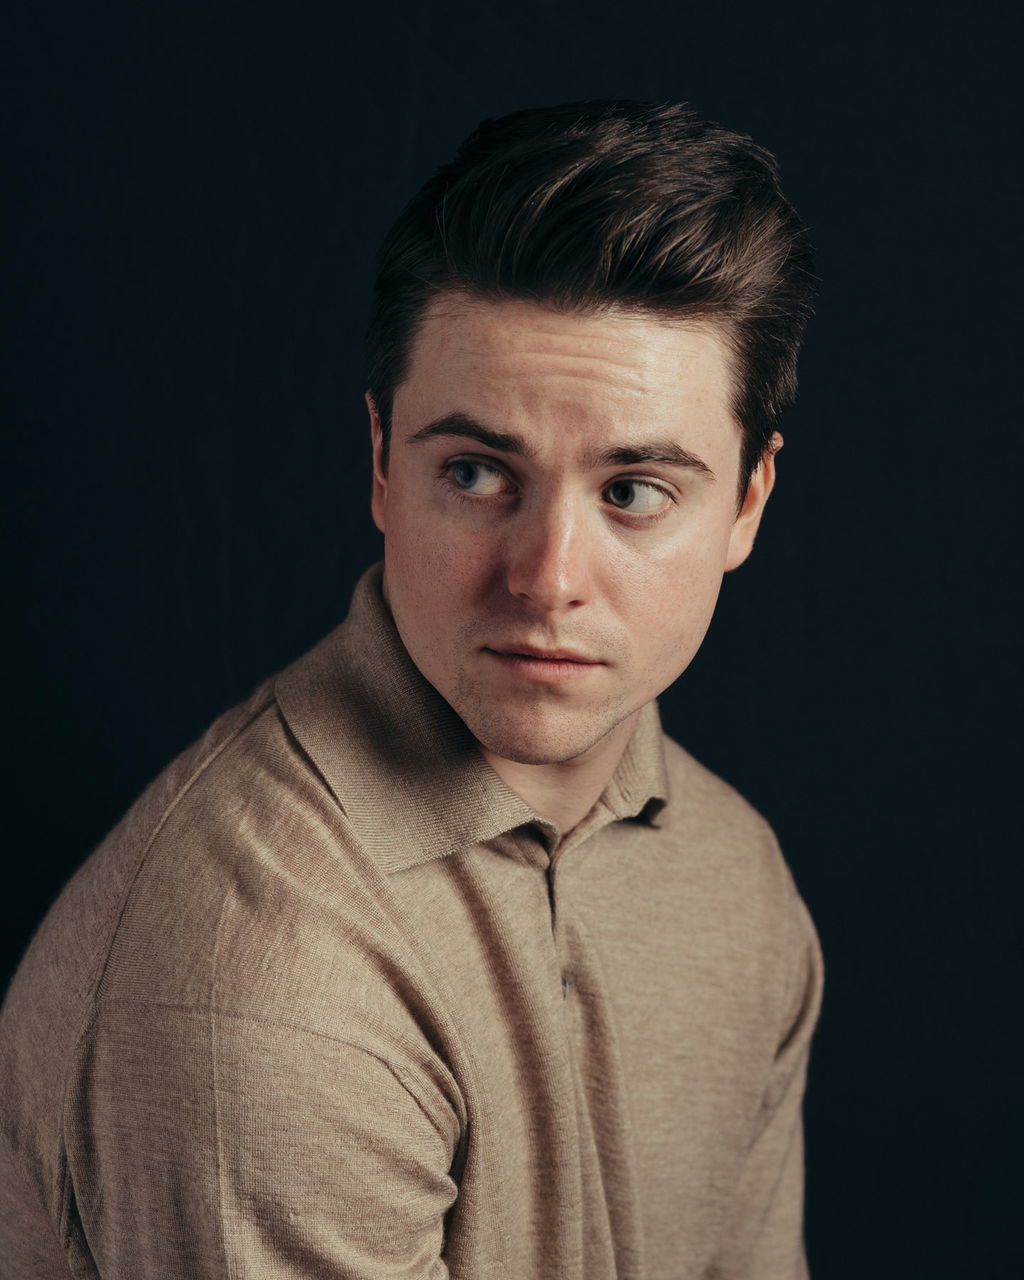 studio shot, portrait, looking at camera, one person, indoors, black background, headshot, front view, young adult, young men, handsome, serious, confidence, close-up, cut out, gray, beautiful people, casual clothing, human face